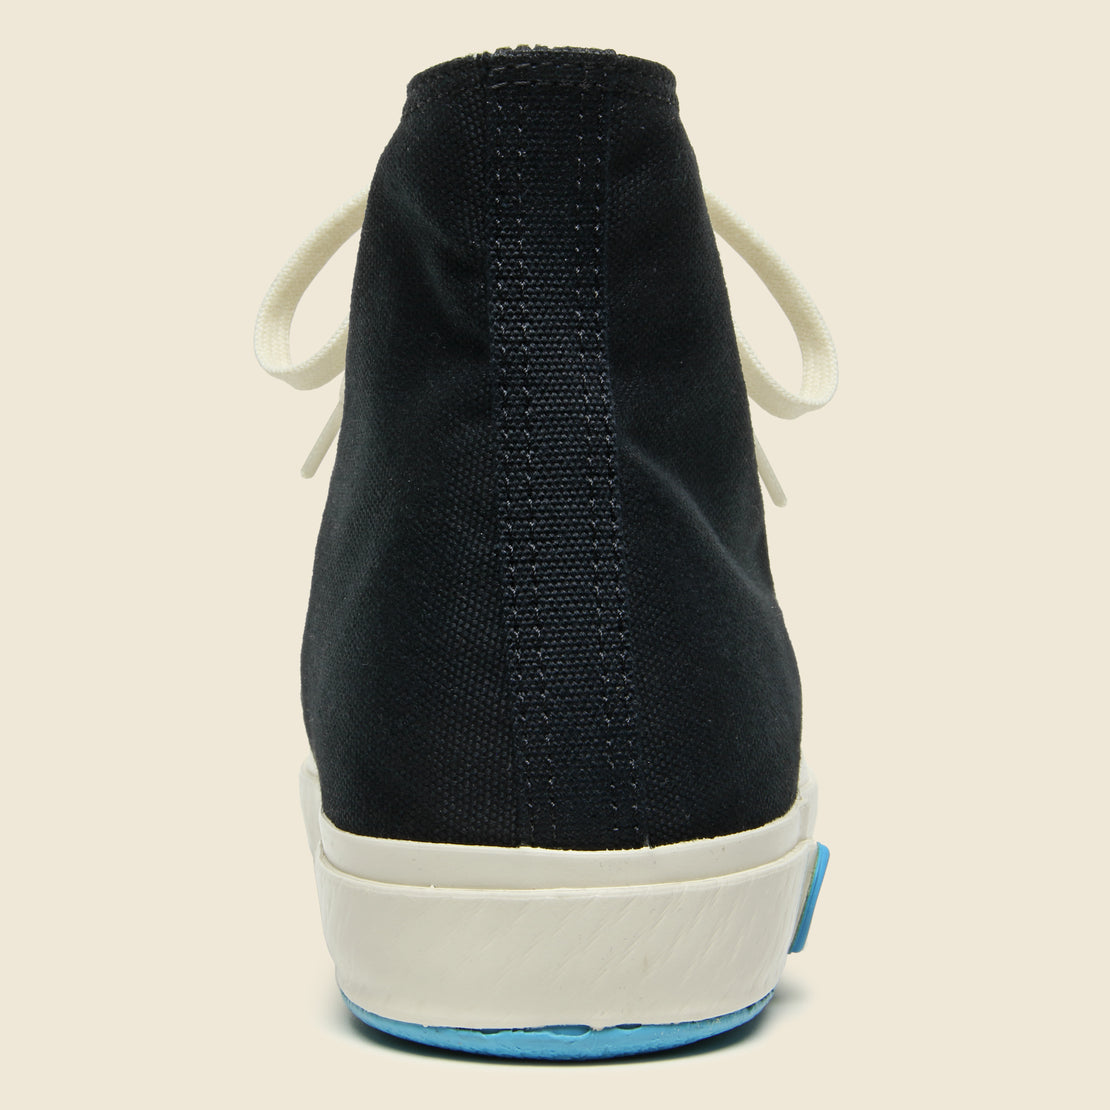 01-JP Hi Sneaker - Black - Shoes Like Pottery - STAG Provisions - Shoes - Athletic